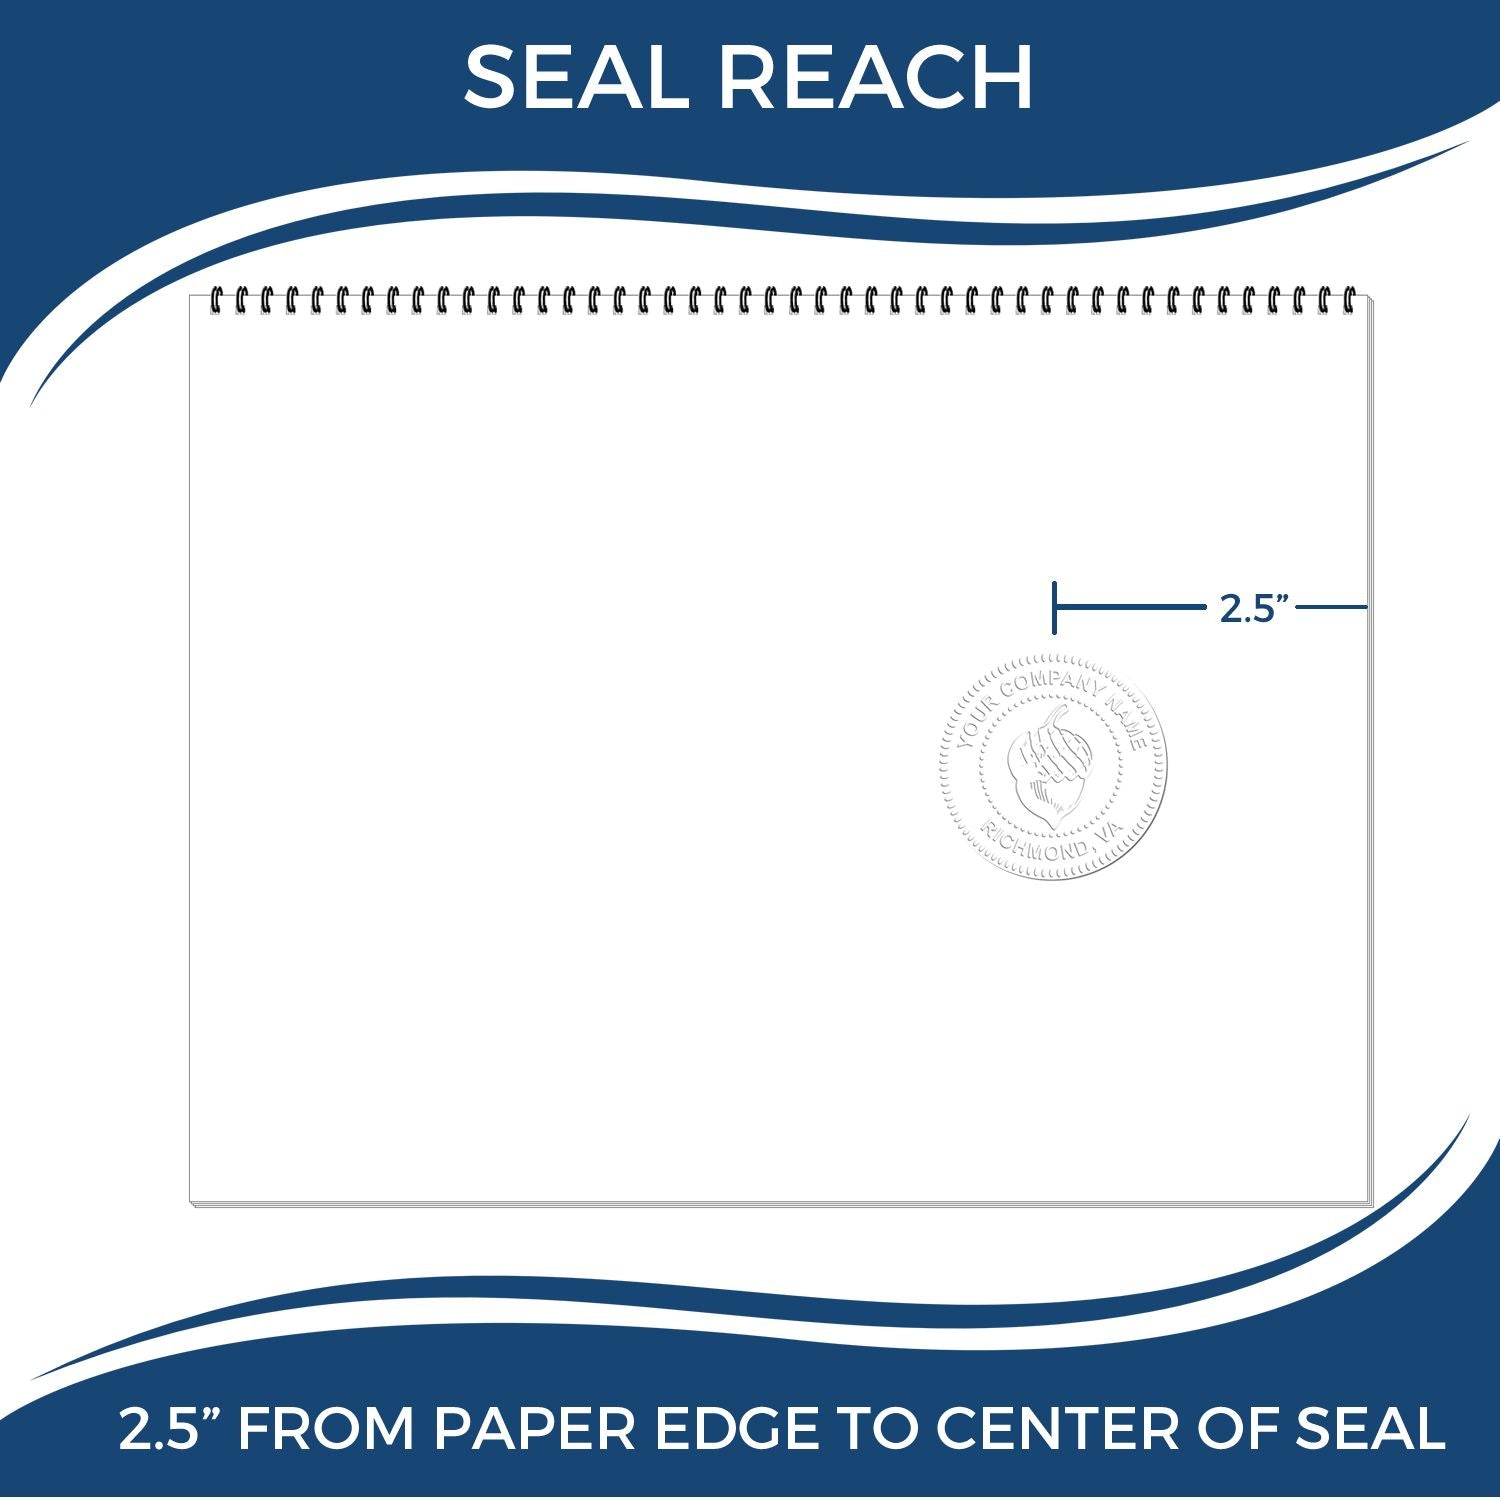 An infographic showing the seal reach which is represented by a ruler and a miniature seal image of the Long Reach Maine PE Seal